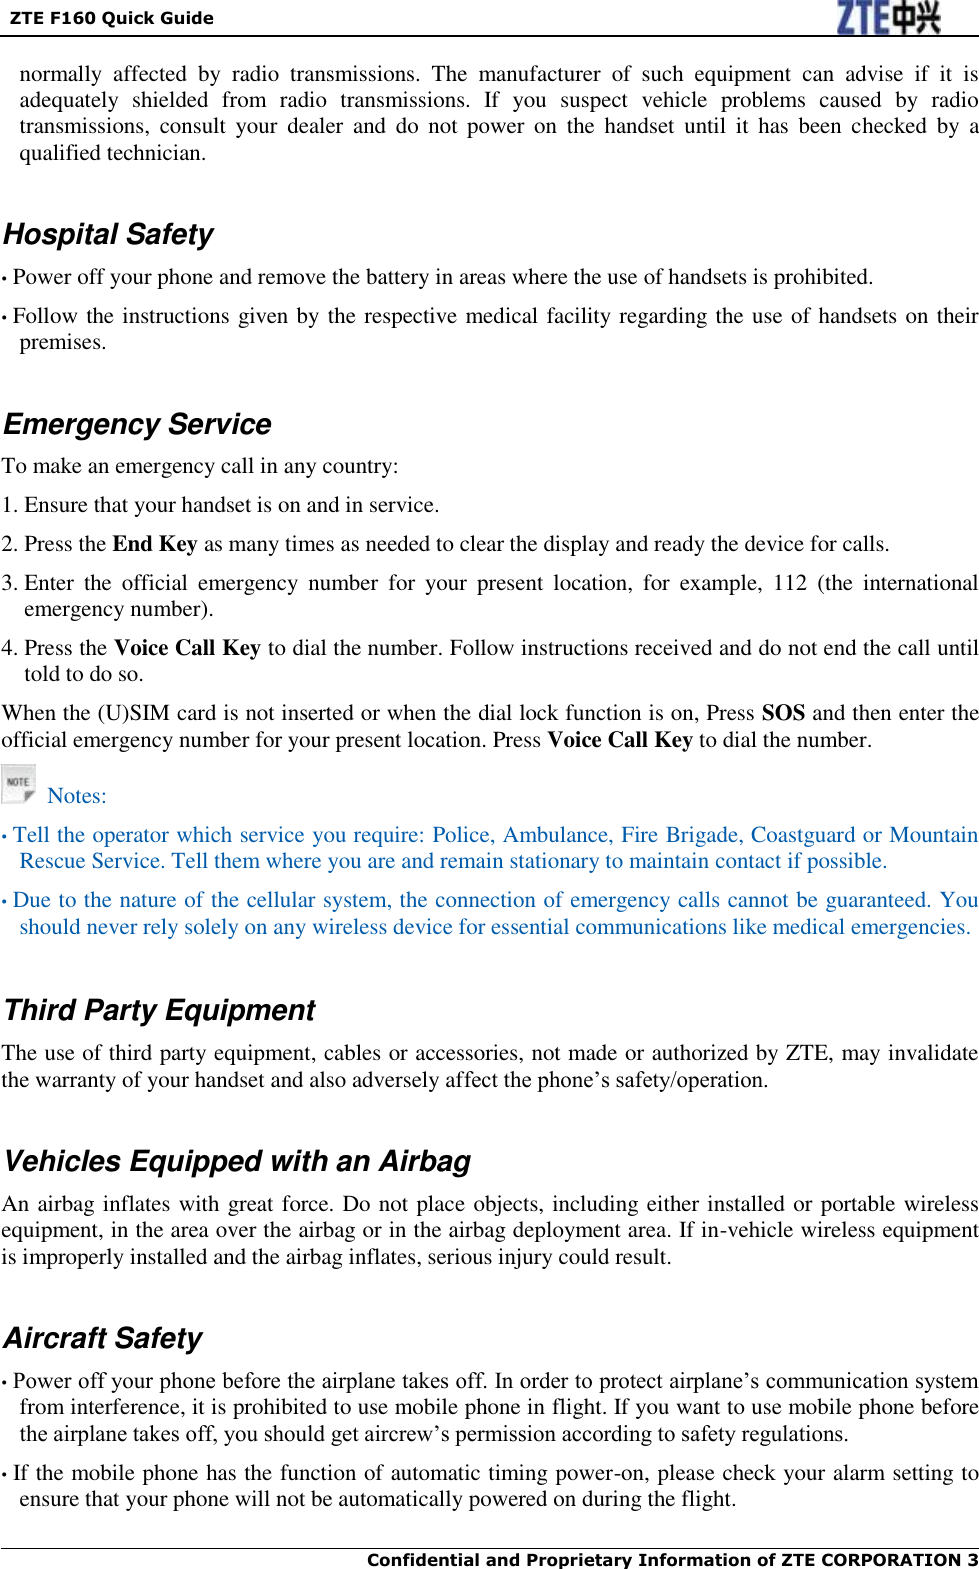   ZTE F160 Quick Guide  Confidential and Proprietary Information of ZTE CORPORATION 3    normally  affected  by  radio  transmissions.  The  manufacturer  of  such  equipment  can  advise  if  it  is adequately  shielded  from  radio  transmissions.  If  you  suspect  vehicle  problems  caused  by  radio transmissions,  consult  your  dealer  and  do  not  power  on  the  handset  until  it  has  been  checked  by  a qualified technician.  Hospital Safety • Power off your phone and remove the battery in areas where the use of handsets is prohibited. • Follow the instructions given by the respective medical facility regarding the use of handsets on their premises.  Emergency Service To make an emergency call in any country: 1. Ensure that your handset is on and in service. 2. Press the End Key as many times as needed to clear the display and ready the device for calls. 3. Enter  the  official  emergency  number  for  your  present  location,  for  example,  112  (the  international emergency number). 4. Press the Voice Call Key to dial the number. Follow instructions received and do not end the call until told to do so. When the (U)SIM card is not inserted or when the dial lock function is on, Press SOS and then enter the official emergency number for your present location. Press Voice Call Key to dial the number.   Notes: • Tell the operator which service you require: Police, Ambulance, Fire Brigade, Coastguard or Mountain Rescue Service. Tell them where you are and remain stationary to maintain contact if possible. • Due to the nature of the cellular system, the connection of emergency calls cannot be guaranteed. You should never rely solely on any wireless device for essential communications like medical emergencies.   Third Party Equipment The use of third party equipment, cables or accessories, not made or authorized by ZTE, may invalidate the warranty of your handset and also adversely affect the phone‟s safety/operation.  Vehicles Equipped with an Airbag An airbag inflates with great force. Do not place objects, including either installed or portable wireless equipment, in the area over the airbag or in the airbag deployment area. If in-vehicle wireless equipment is improperly installed and the airbag inflates, serious injury could result.  Aircraft Safety • Power off your phone before the airplane takes off. In order to protect airplane‟s communication system from interference, it is prohibited to use mobile phone in flight. If you want to use mobile phone before the airplane takes off, you should get aircrew‟s permission according to safety regulations. • If the mobile phone has the function of automatic timing power-on, please check your alarm setting to ensure that your phone will not be automatically powered on during the flight.  